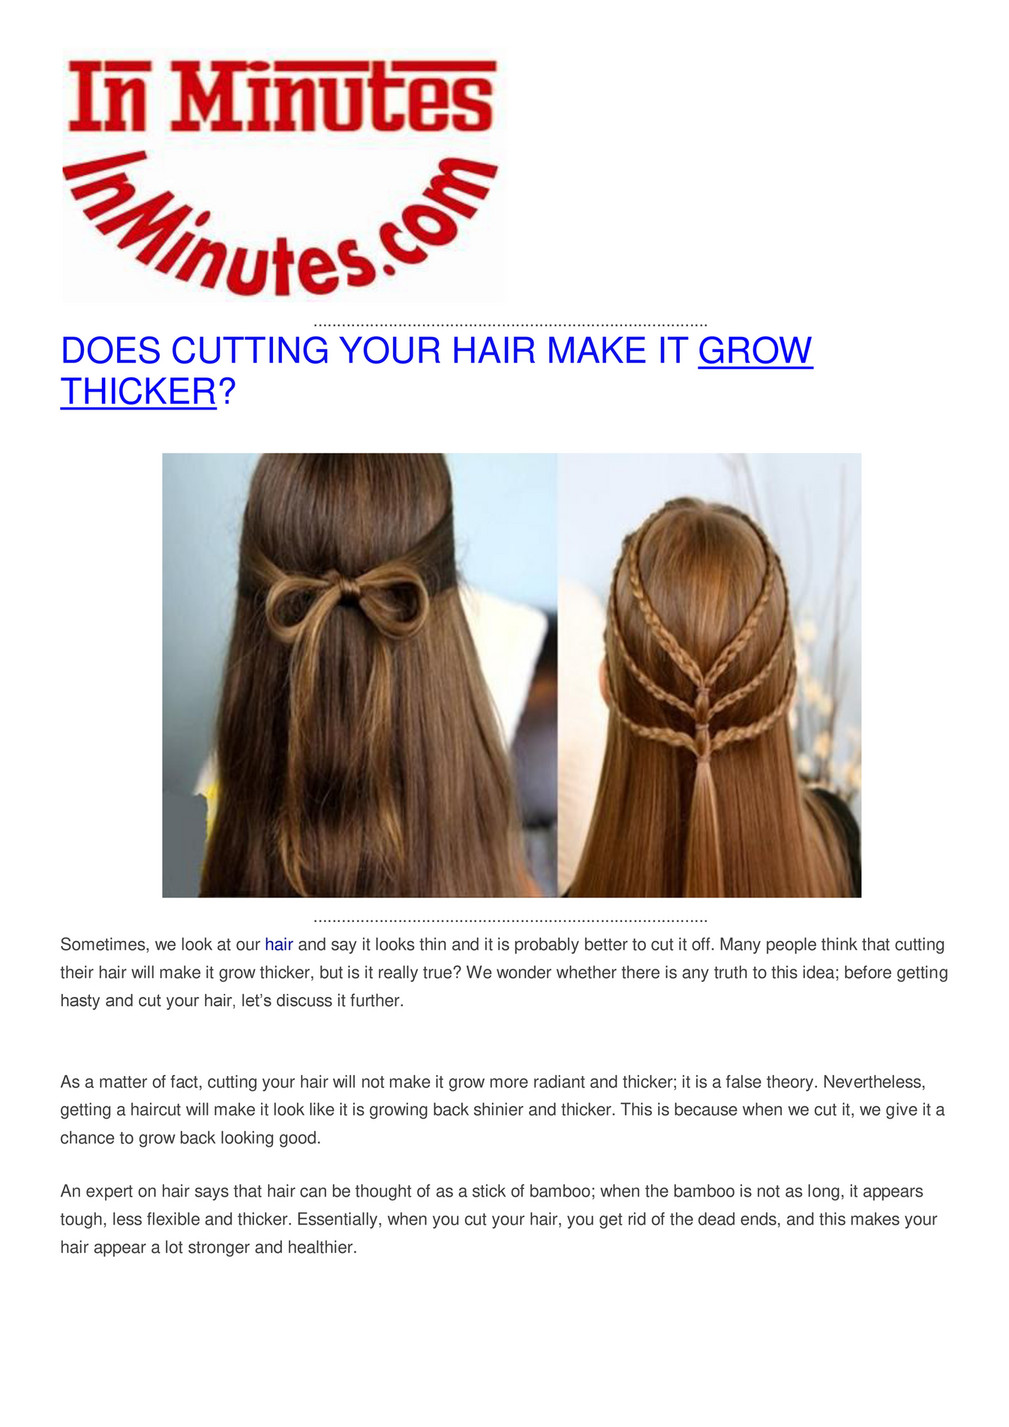 My publications - DOES CUTTING YOUR HAIR MAKE IT GROW THICKER - Page 1 -  Created with 